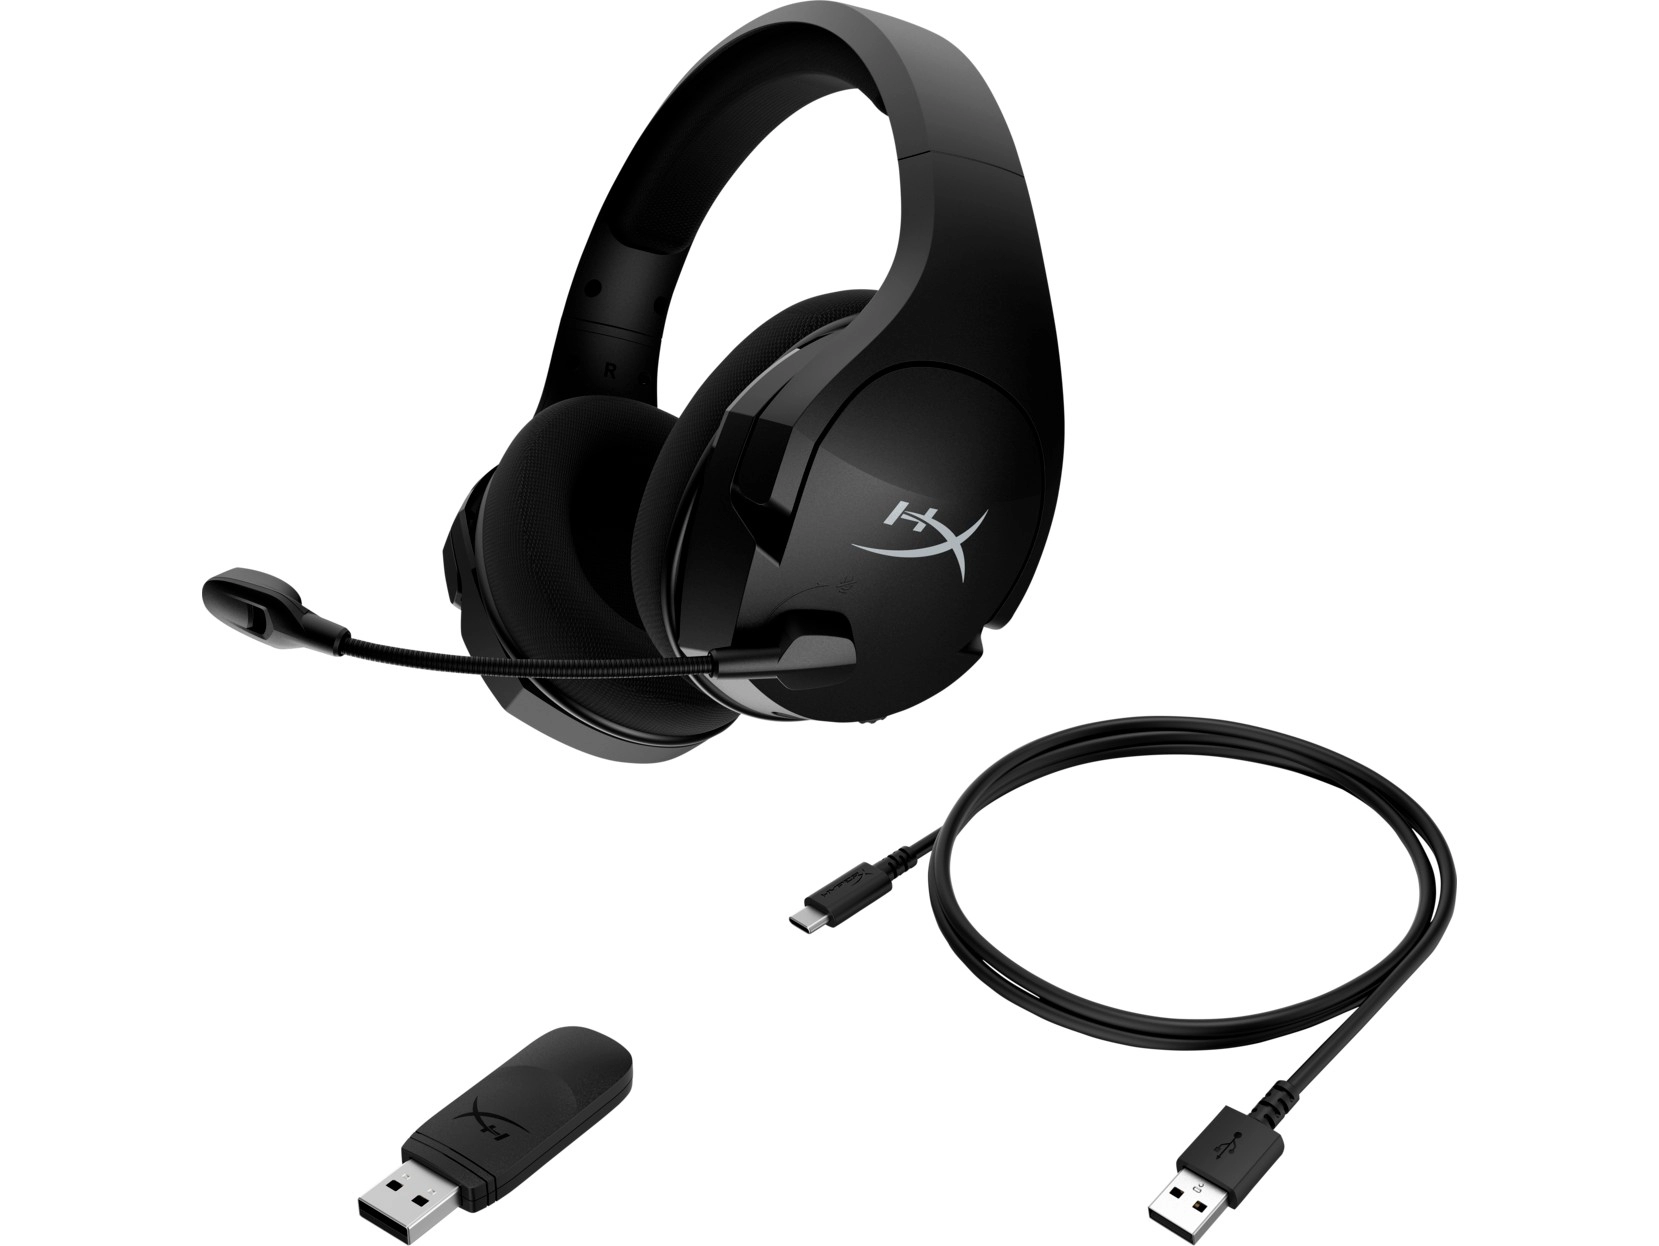 Wireless headset  HyperX Cloud Stinger Core, Black, Virtual 7.1 Surround, 90-degree rotating ear cups, Mic built-in, Swivel-to-mute mic, Frequency response: 20Hz–20000 Hz, USB, 2.4GHz Wireless Connection, max 500mW, PS4/PC, Up to 20  meters